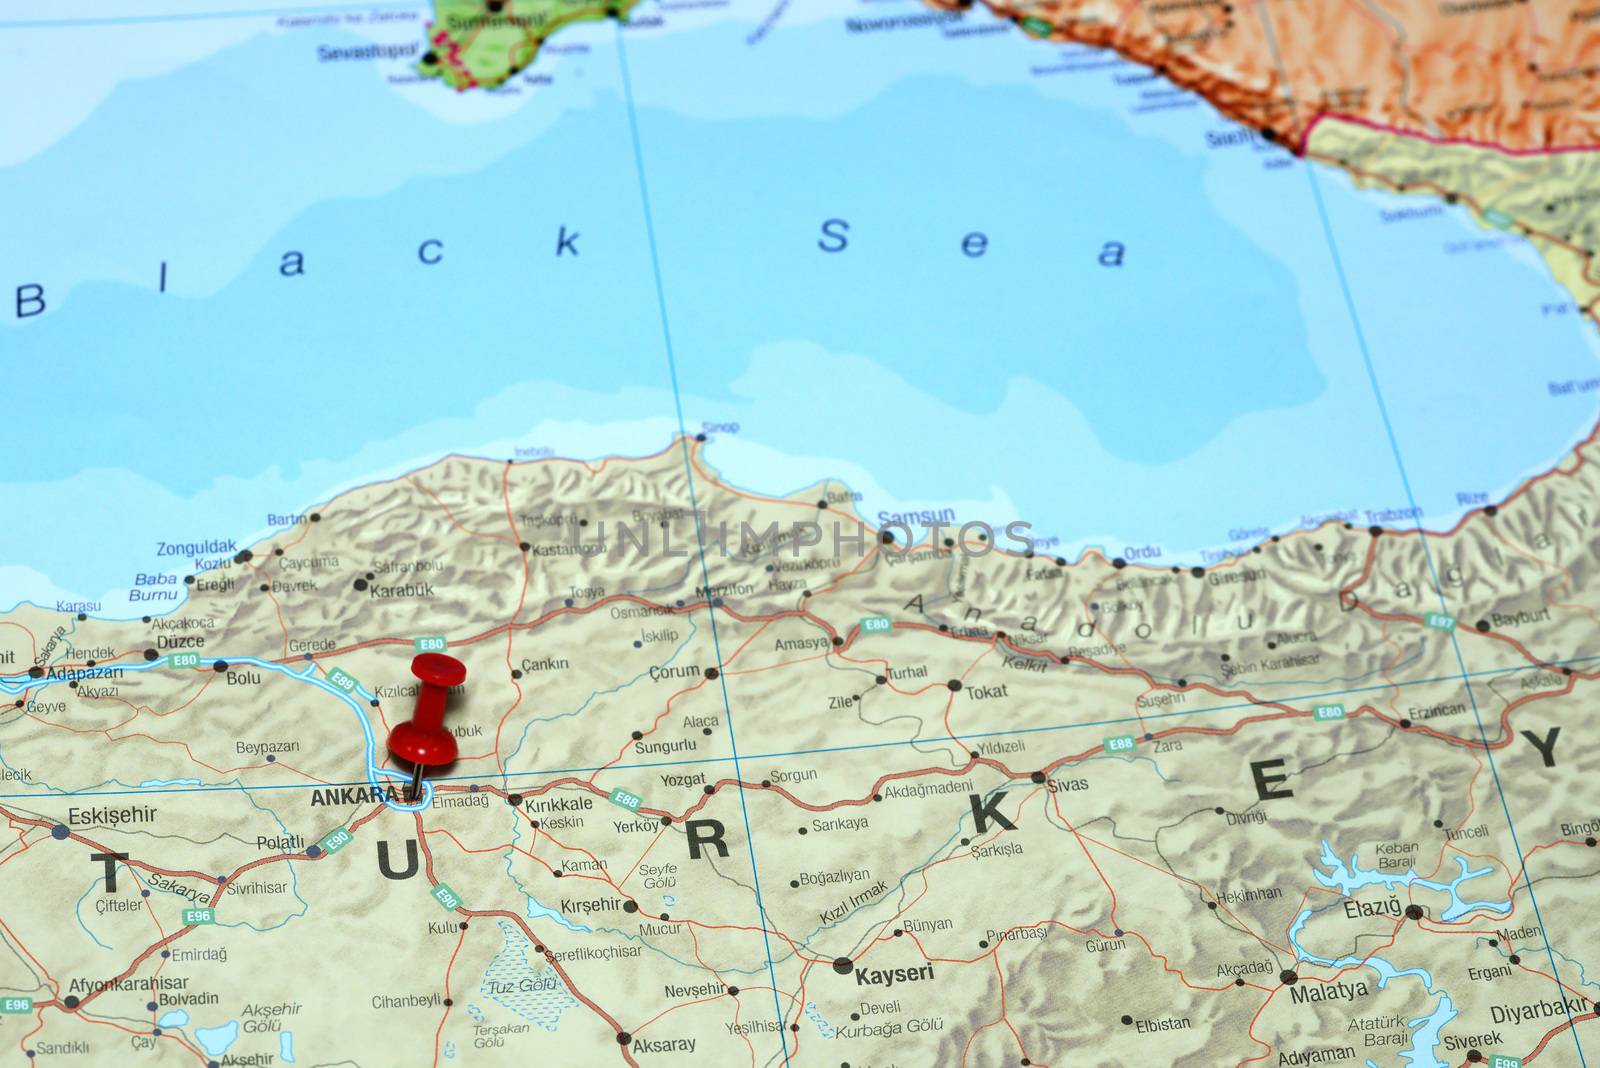 Photo of pinned Ankara on a map of europe. May be used as illustration for traveling theme.